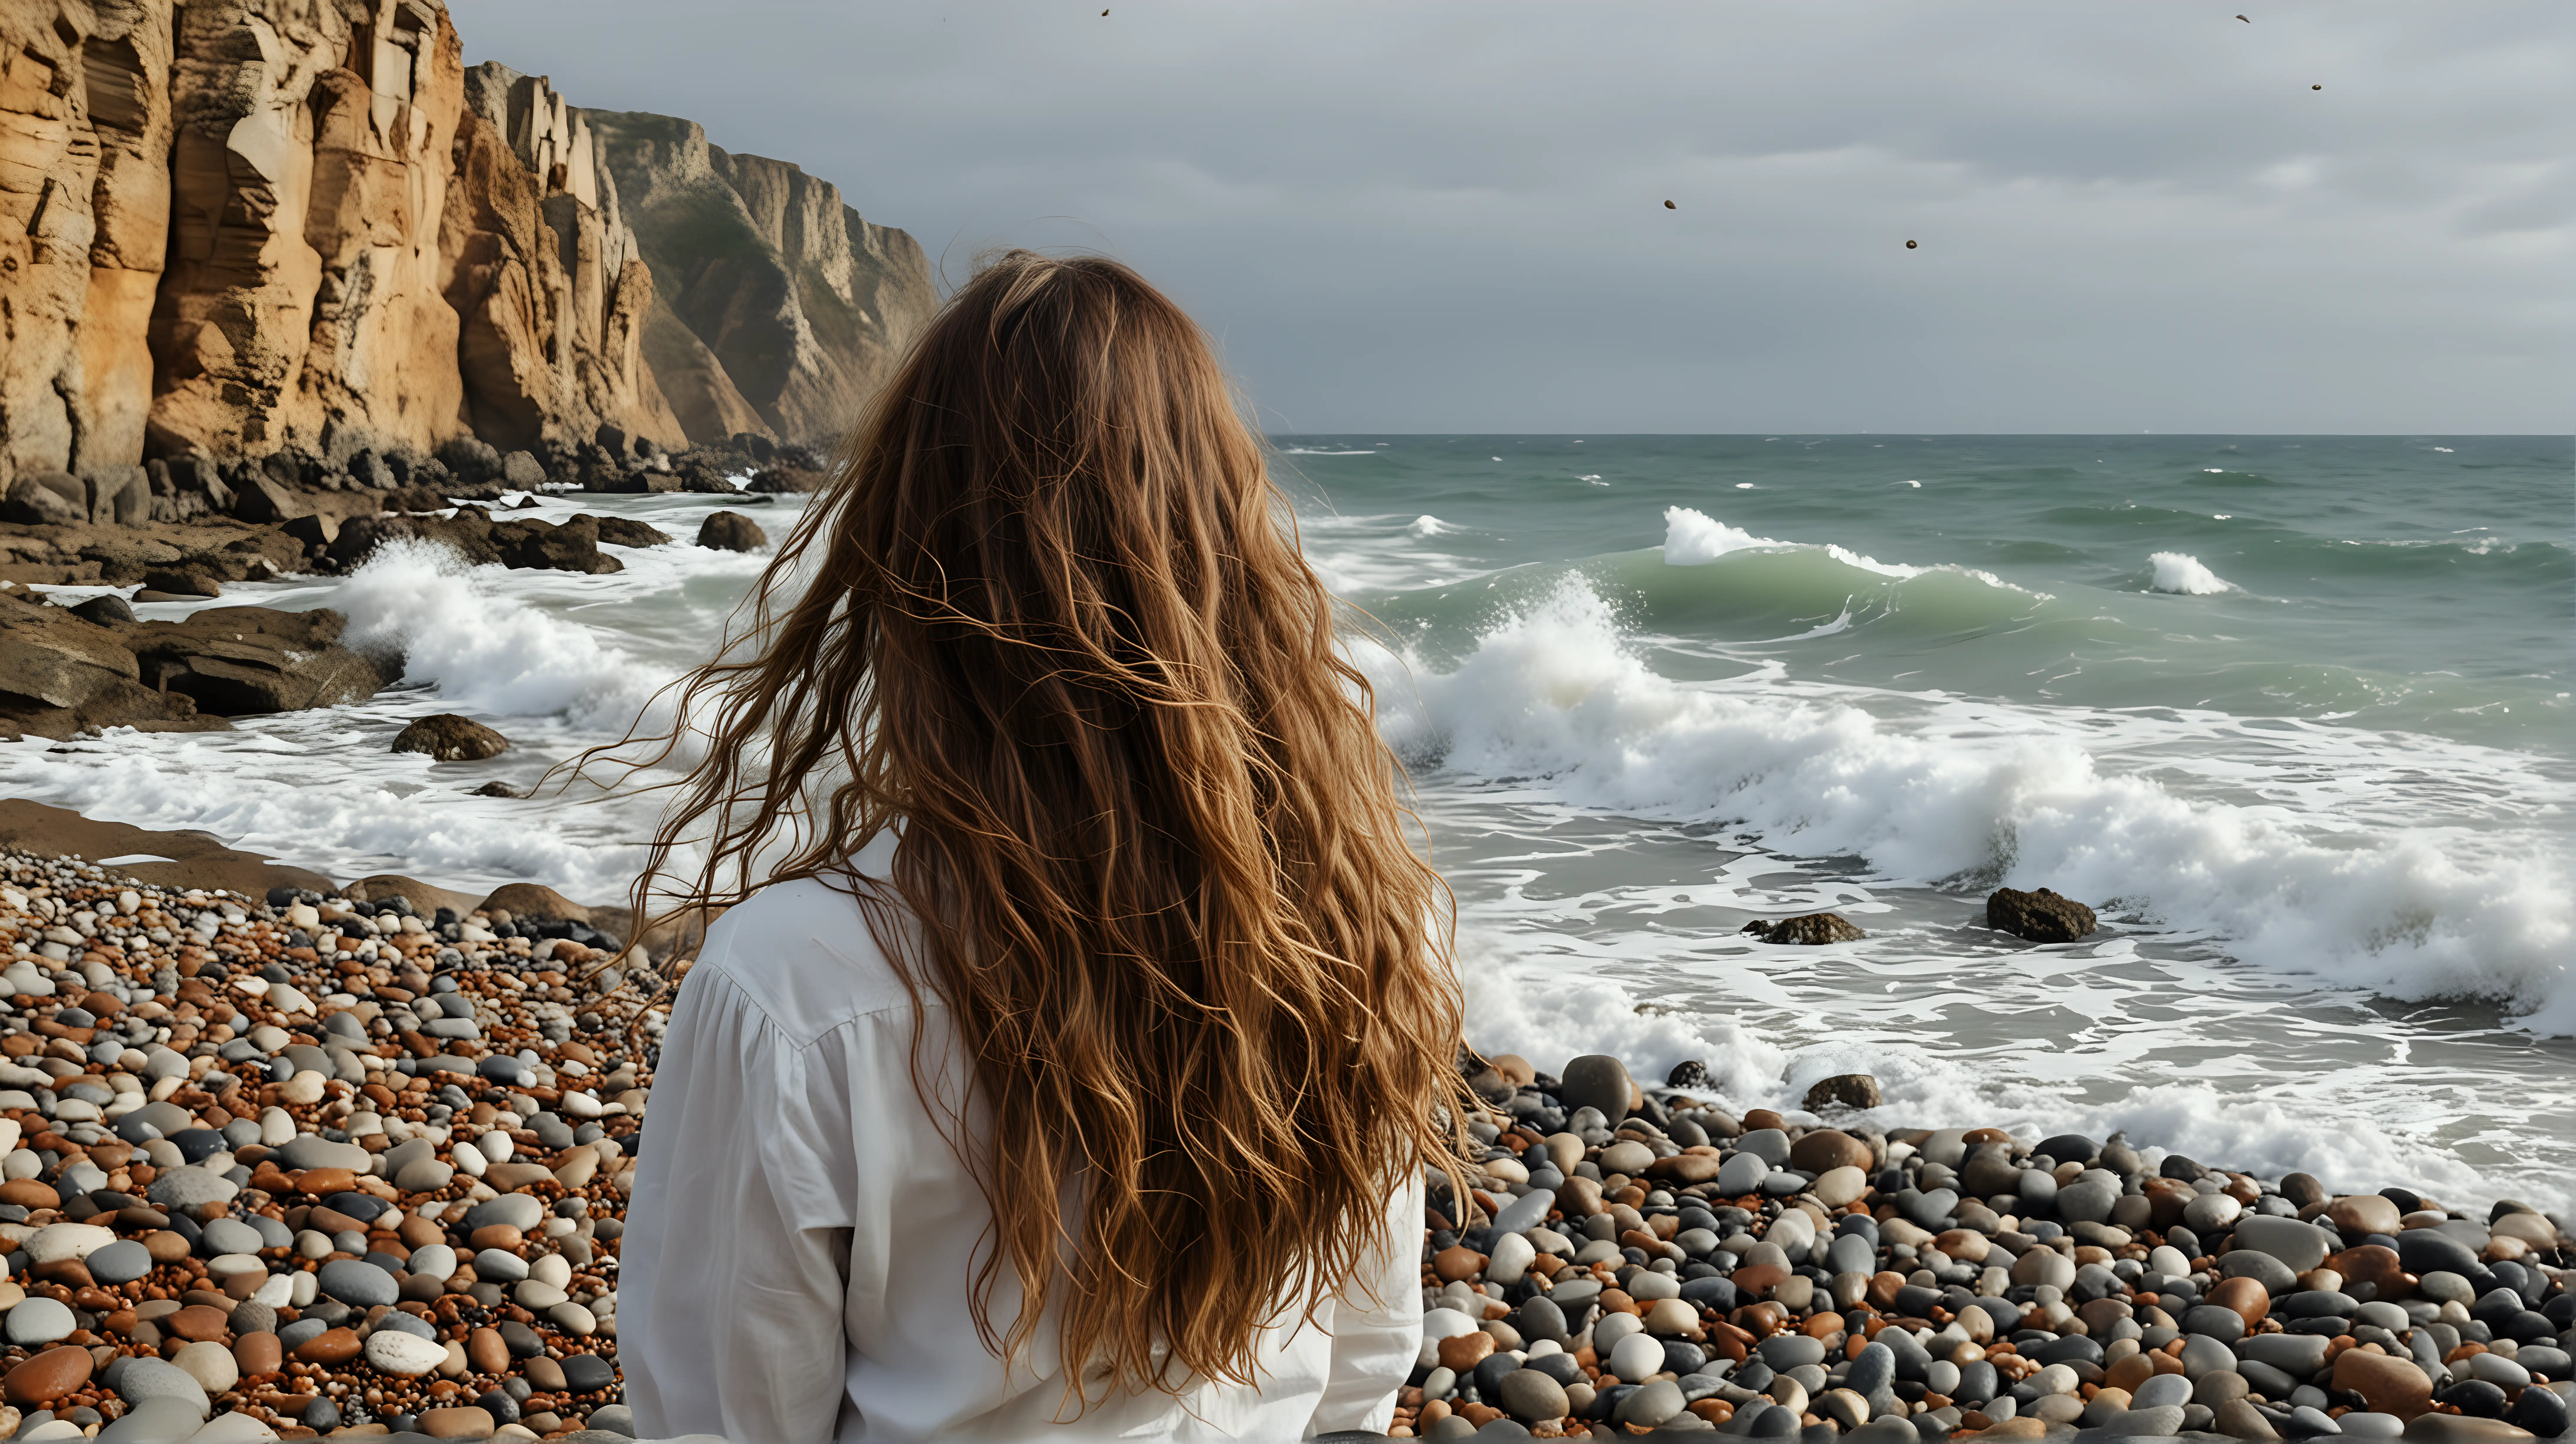 a woman with long hair on a beach with pebbles and high waves breaking. The woman looks at the sea, the portrait of the woman is whole and far to one side and the background are rocks